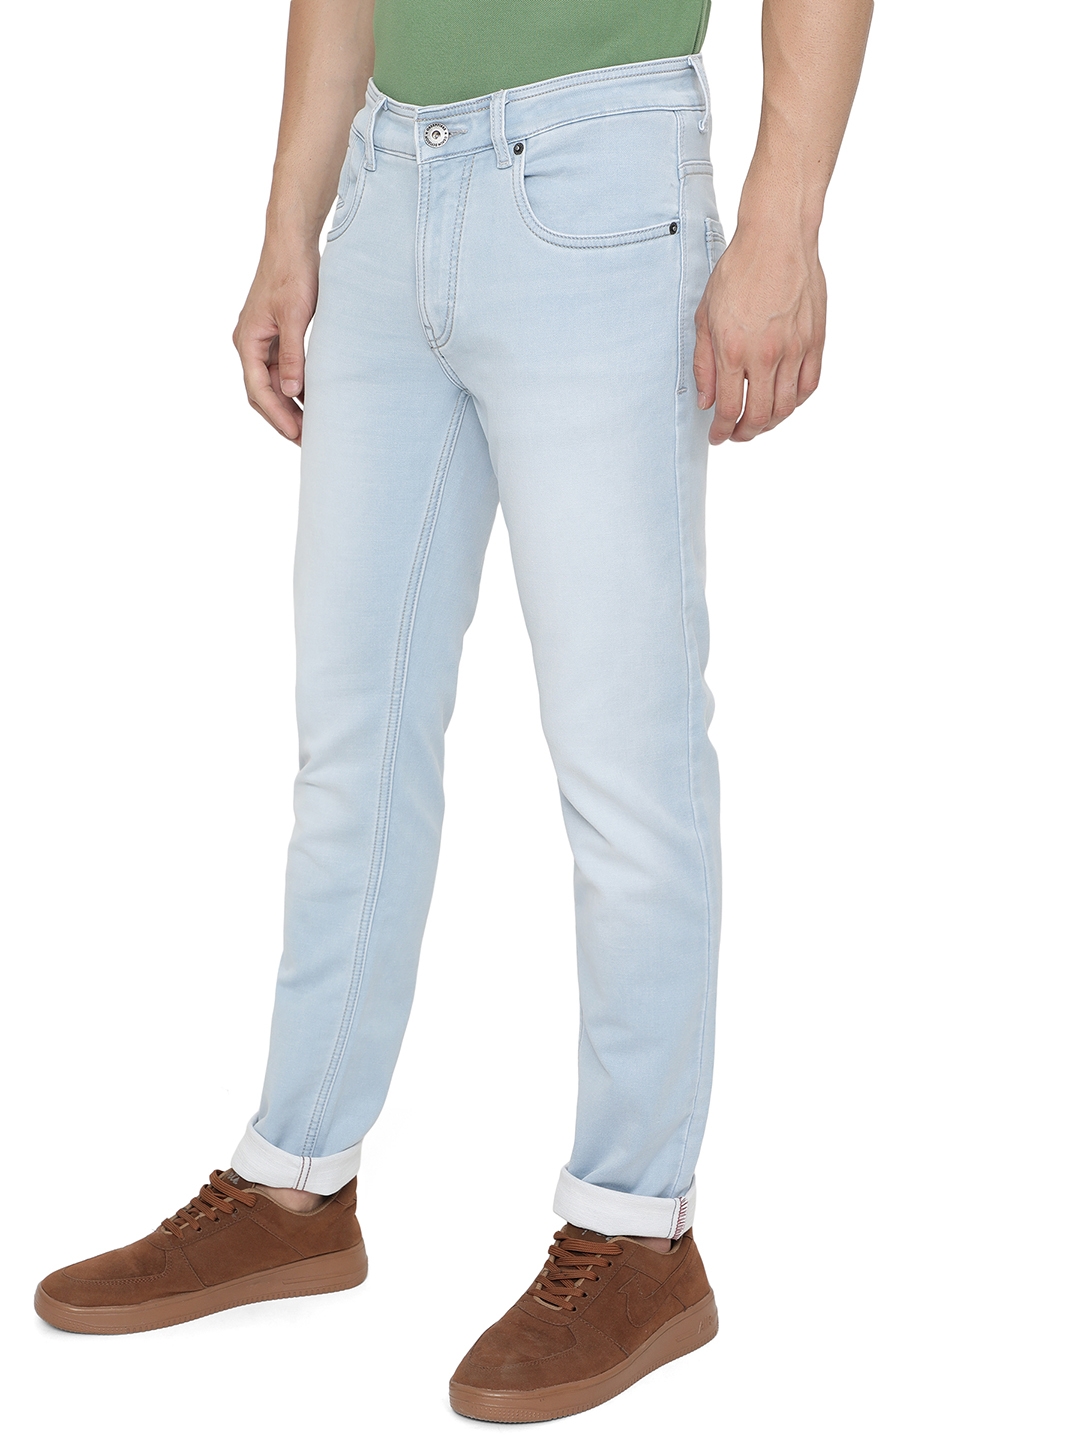 Greenfibre | Ice Blue Solid Narrow Fit Jeans | Greenfibre 1